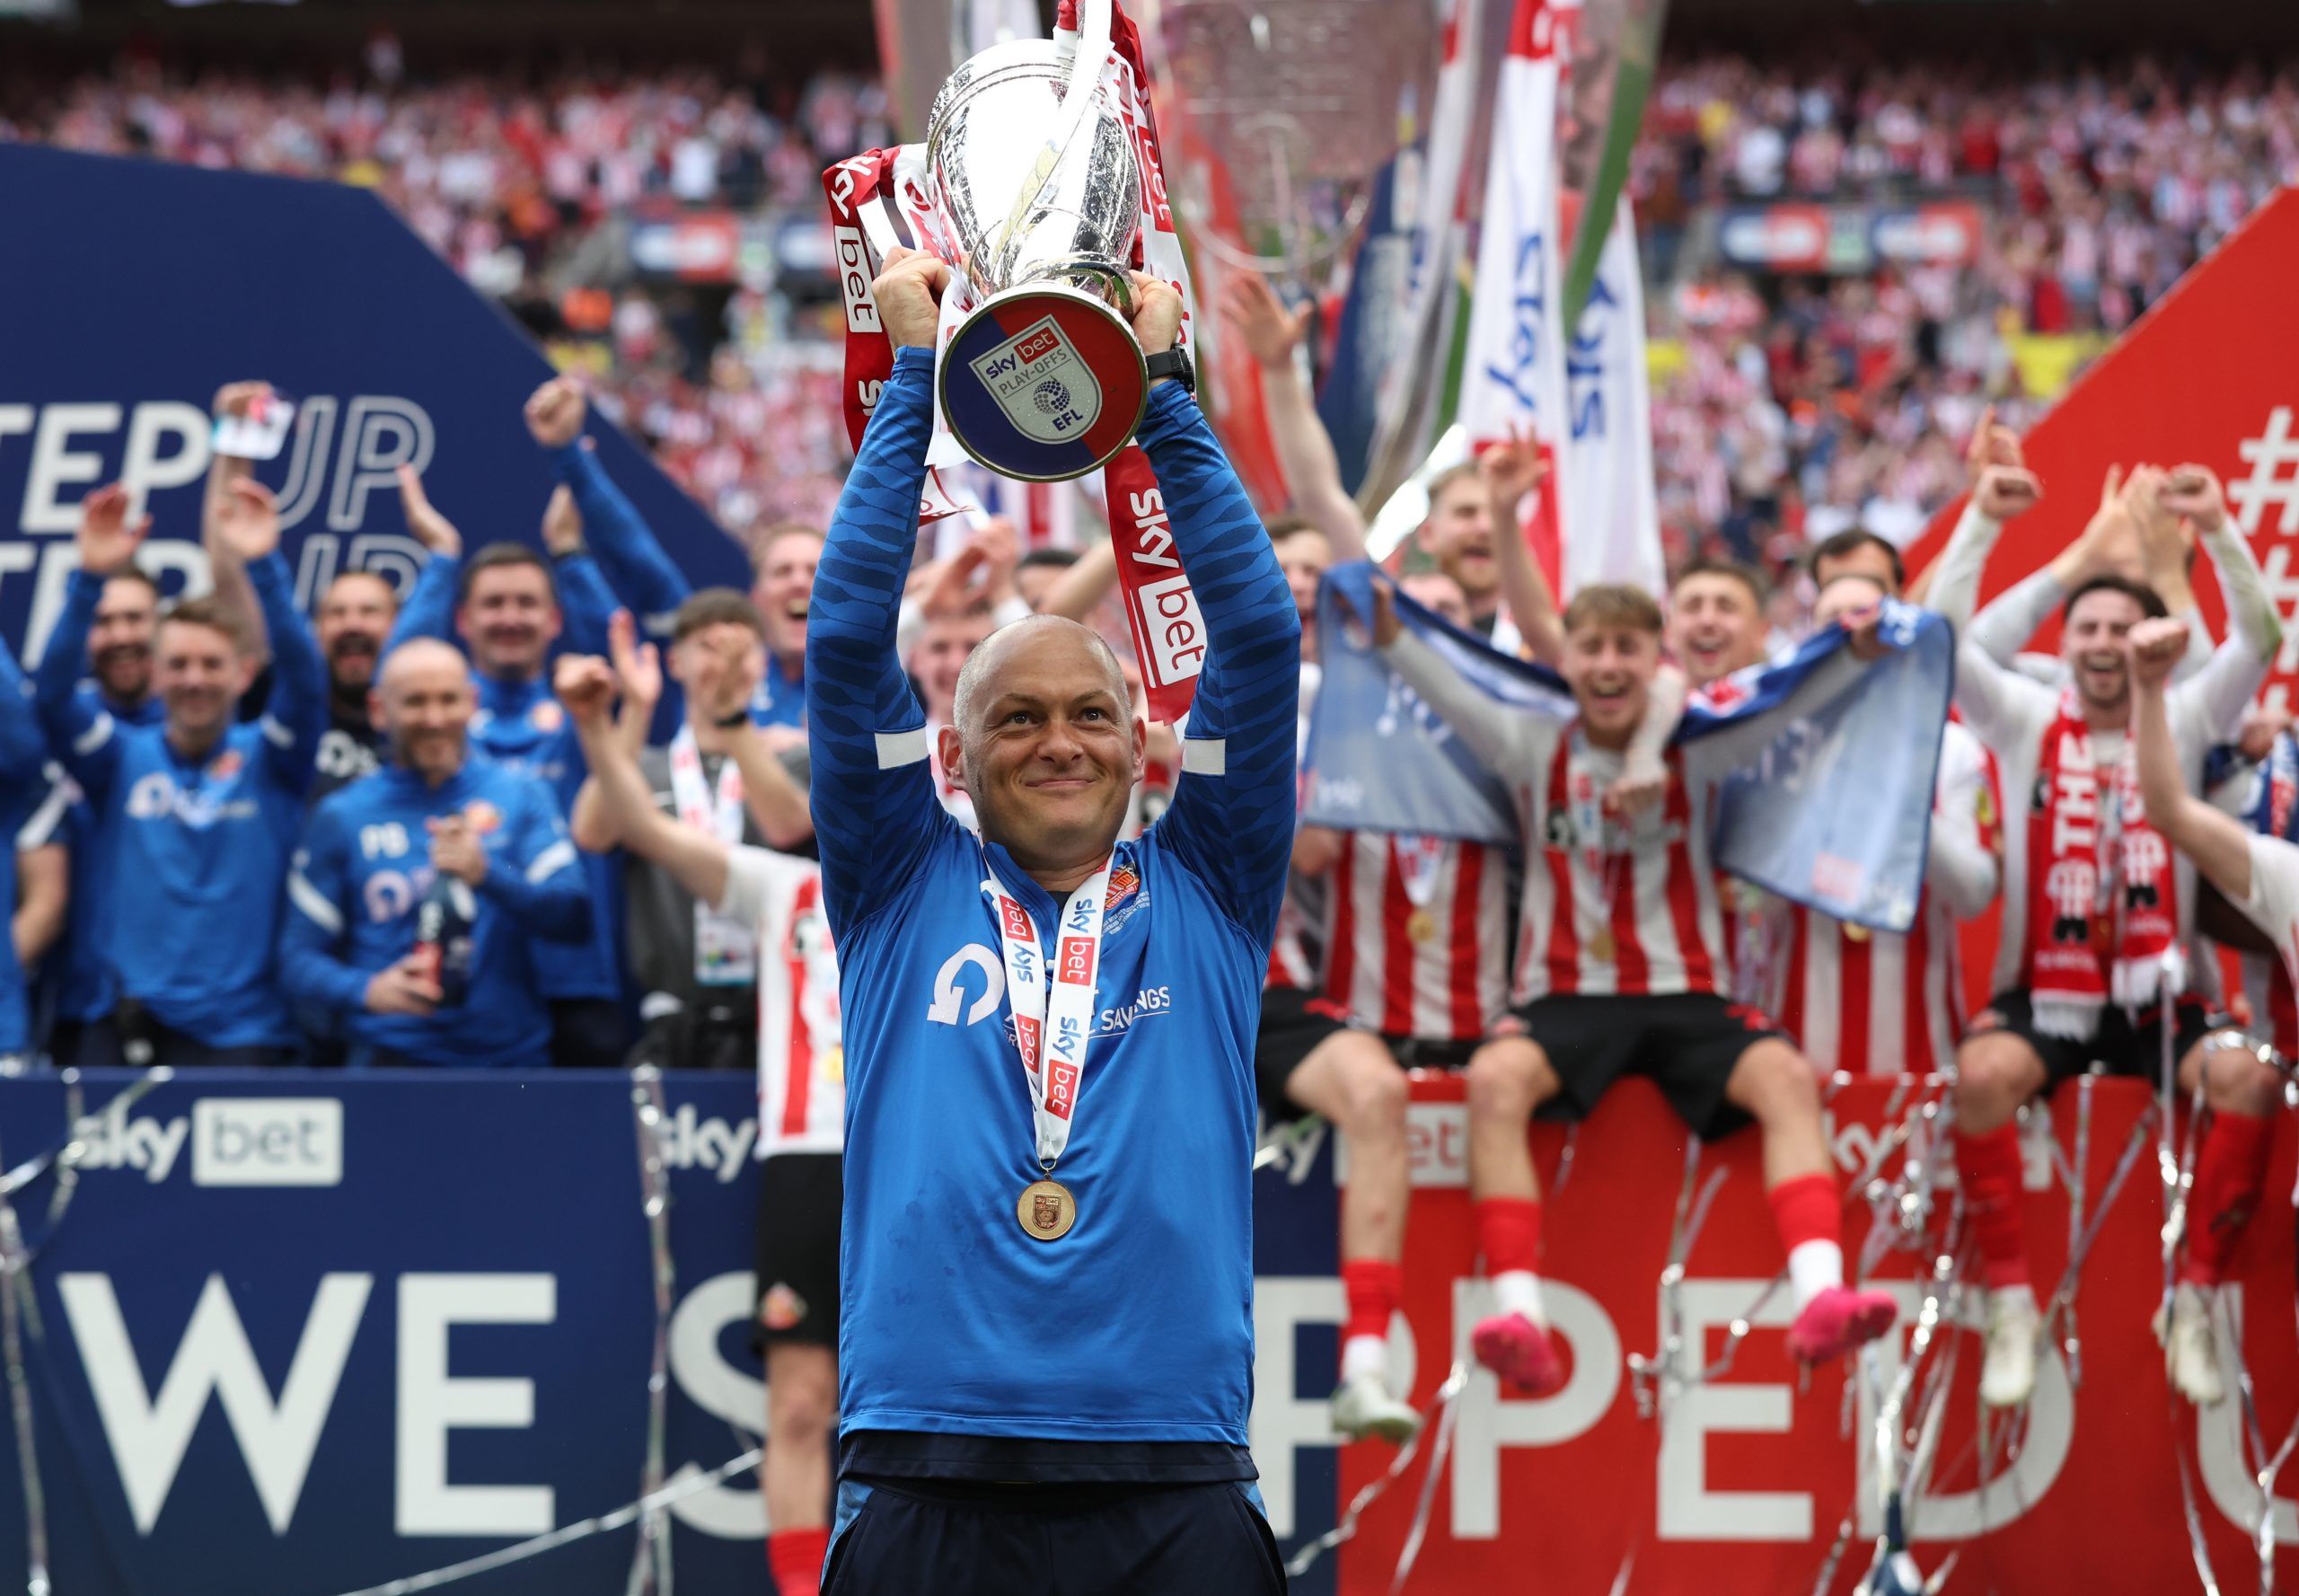 alex-neil-sunderland-afc-transfer-news-summer-signings-championship-safc-interview-latestSoccer Football - League One Play-Off Final - Sunderland v Wycombe Wanderers - Wembley Stadium, London, Britain - May 21, 2022  Sunderland manager Alex Neil celebrates with the trophy after winning the League One Play-Off Action Images/Matthew Childs EDITORIAL USE ONLY. No use with unauthorized audio, video, data, fixture lists, club/league logos or 'live' services. Online in-match use limited to 75 images, 